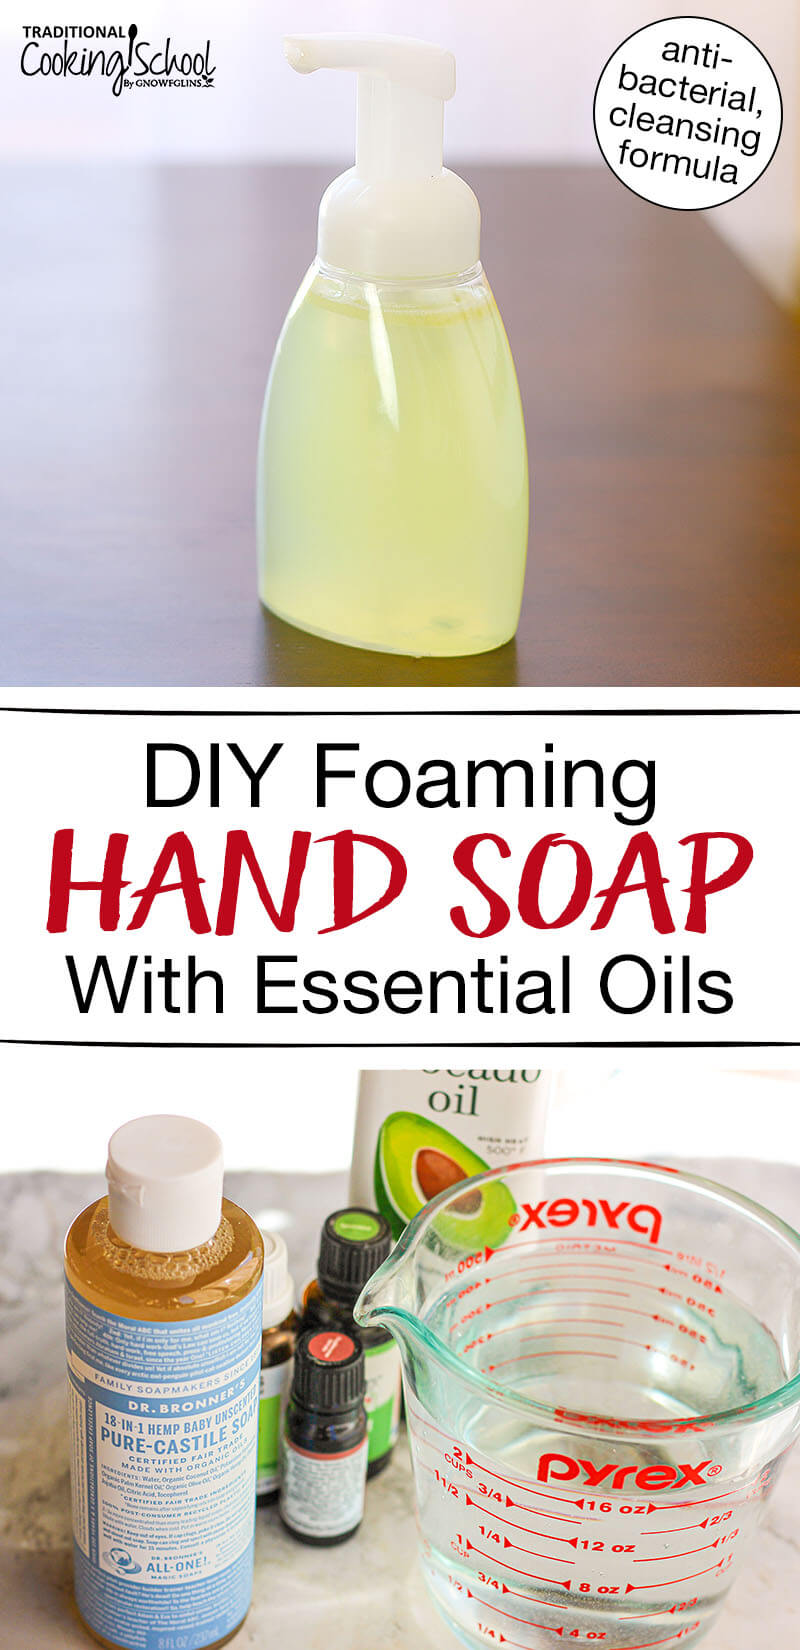 photo collage of ingredients and pump dispenser for making hand soap, with text overlay: "DIY Foaming Hand Soap With Essential Oils (antibacterial, cleansing formula!)"